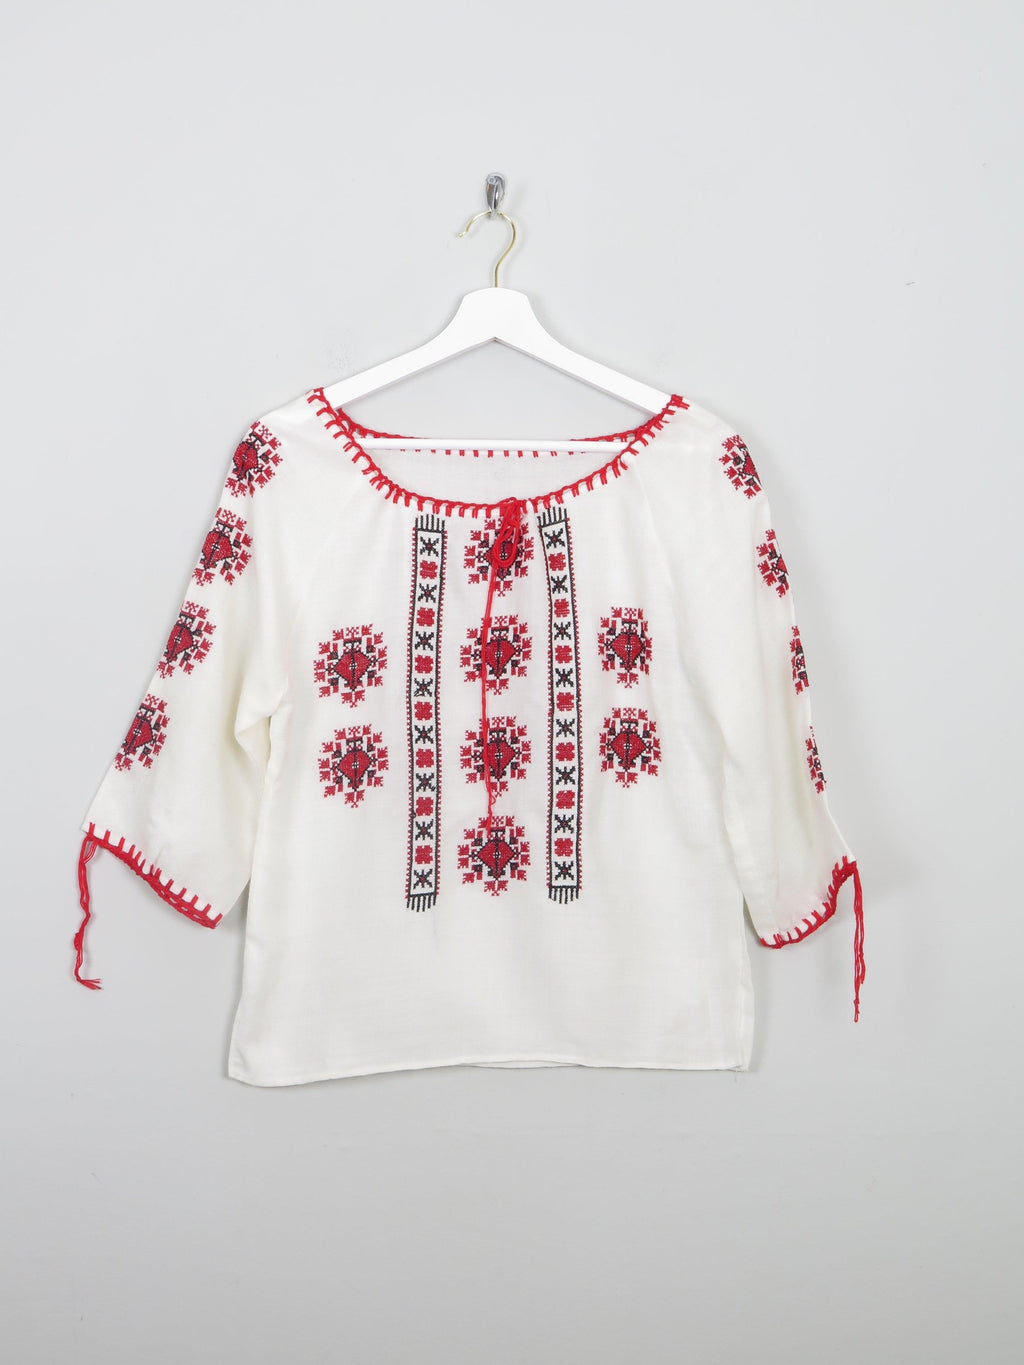 Women’s Embroidered Vintage Cream Peasant Blouse XS - The Harlequin